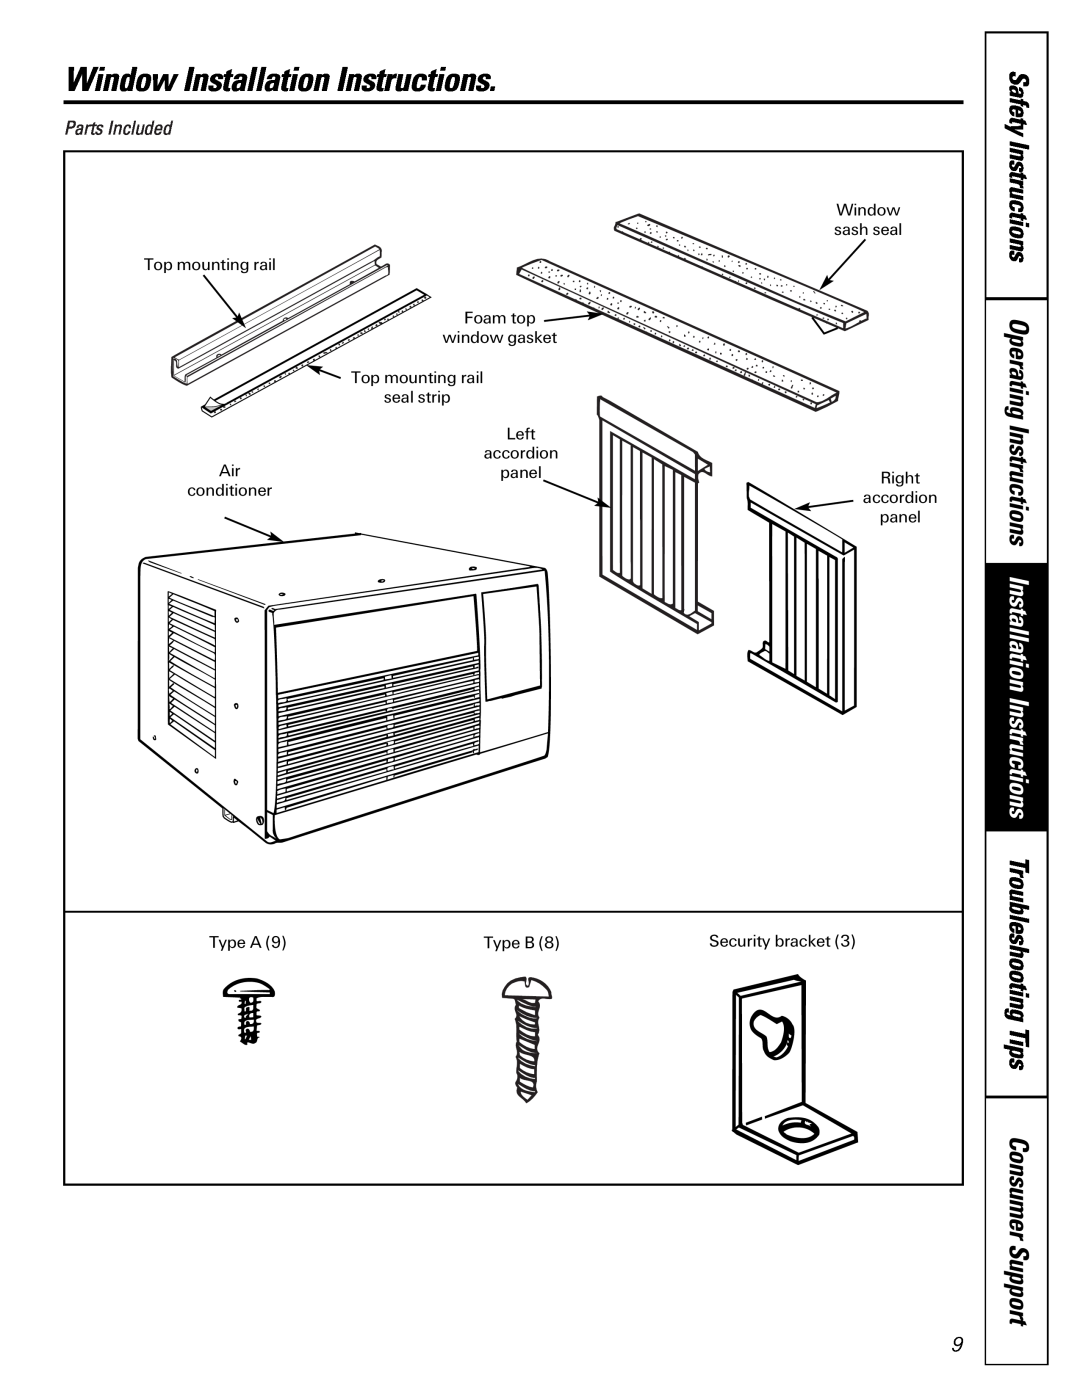 GE ASP05 owner manual Window Installation Instructions, Parts Included 